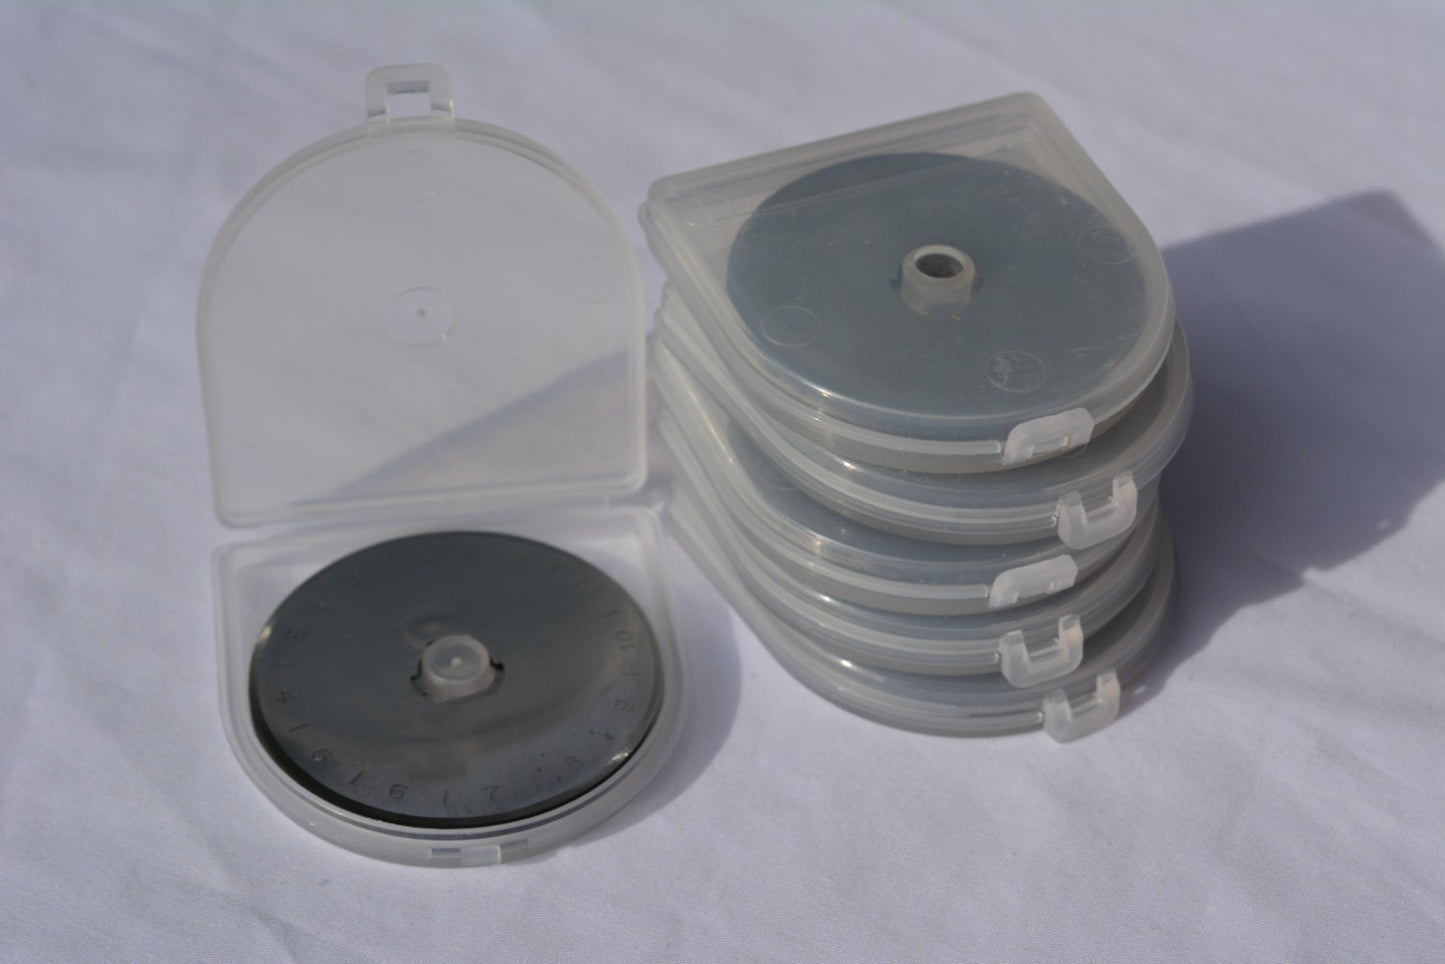 10 pack 45mm Rotary Blades for OLFA / Fiskars / TRUE CUT brand cutters - excellent quality, with plastic storage container